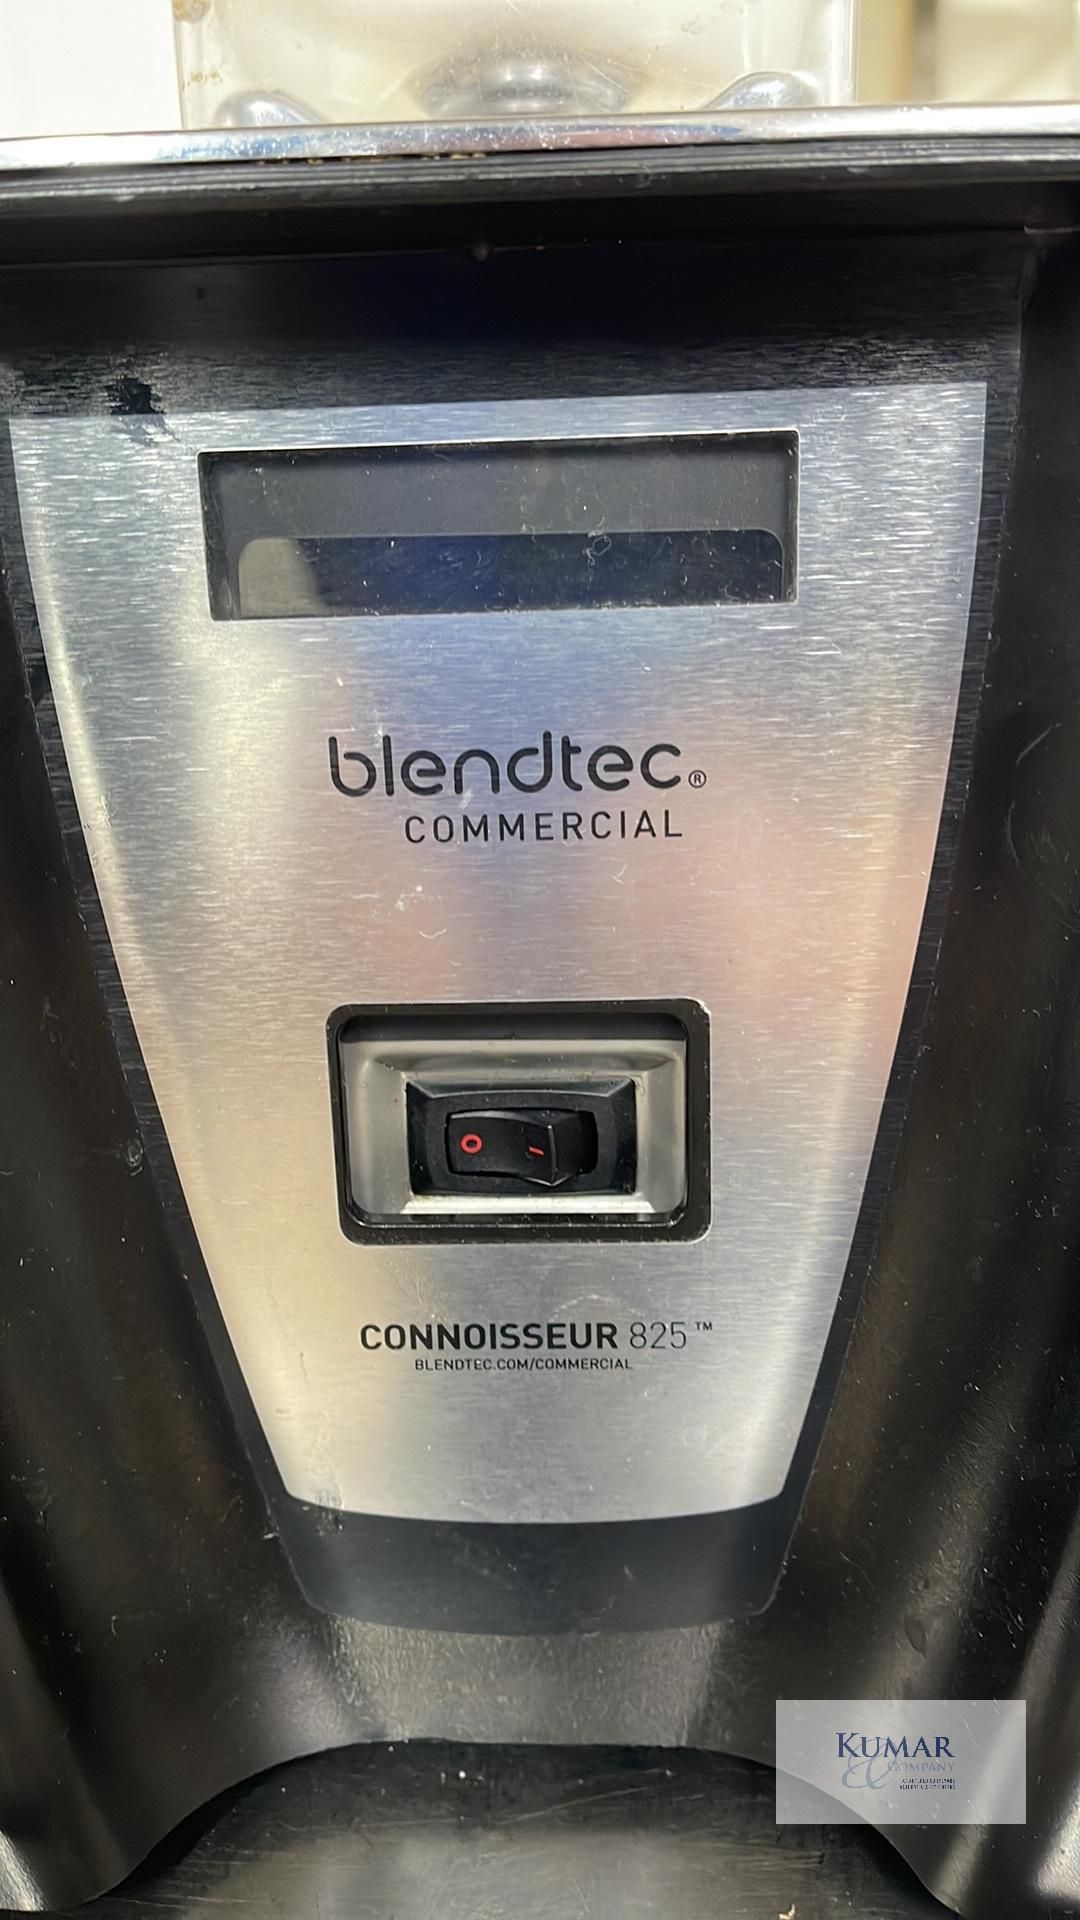 Blendtec Connoisseur 825 Commercial Blender with 2: Containers - New Cost Circa Â£1200 - Image 3 of 7